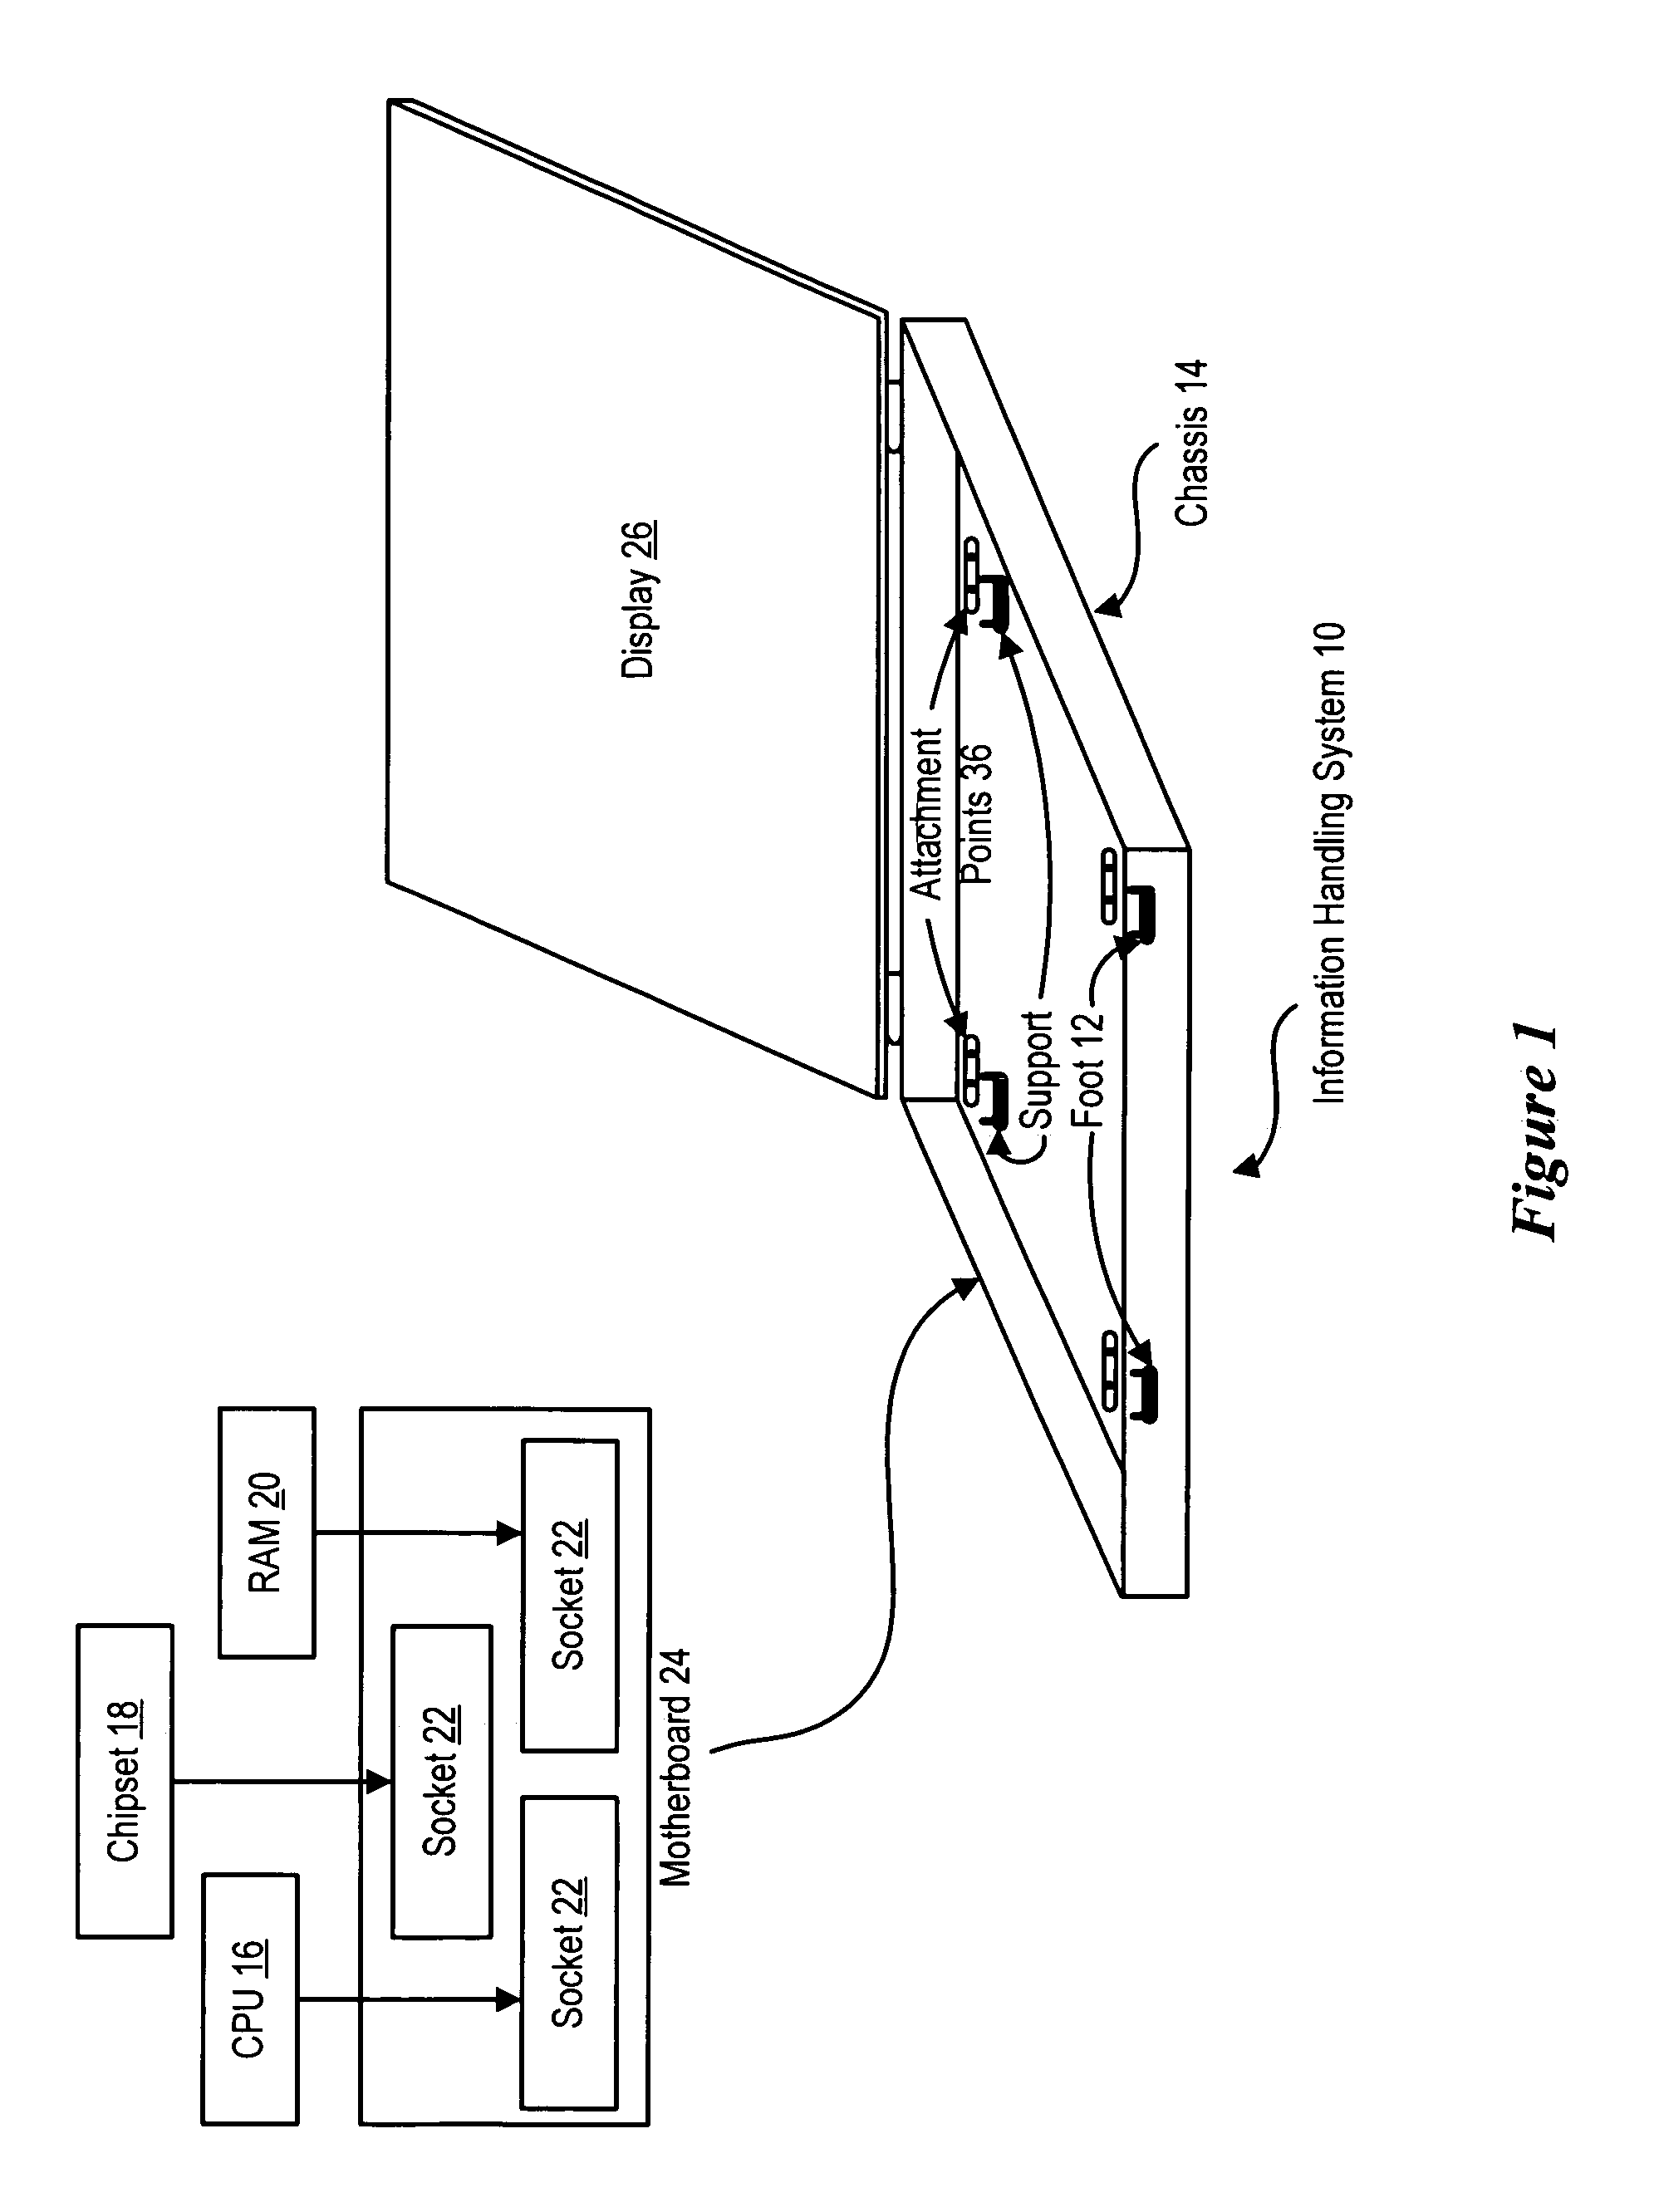 System and method for mechanically fastened information handling system foot